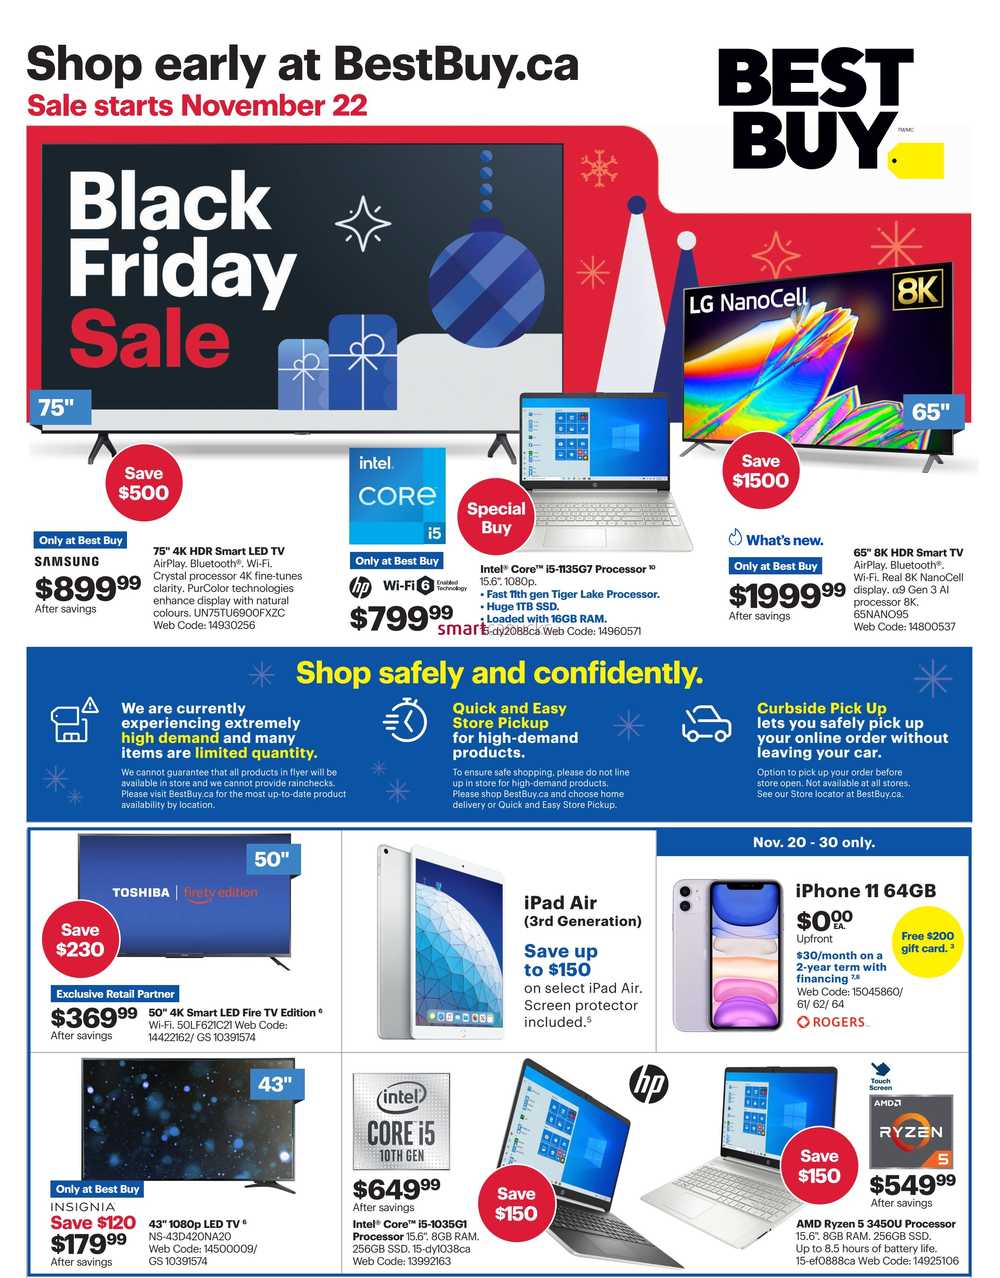 Best Buy Black Friday Flyer November 22 to December 3, 2020 - What Will Wwbw Black Friday Deals Be